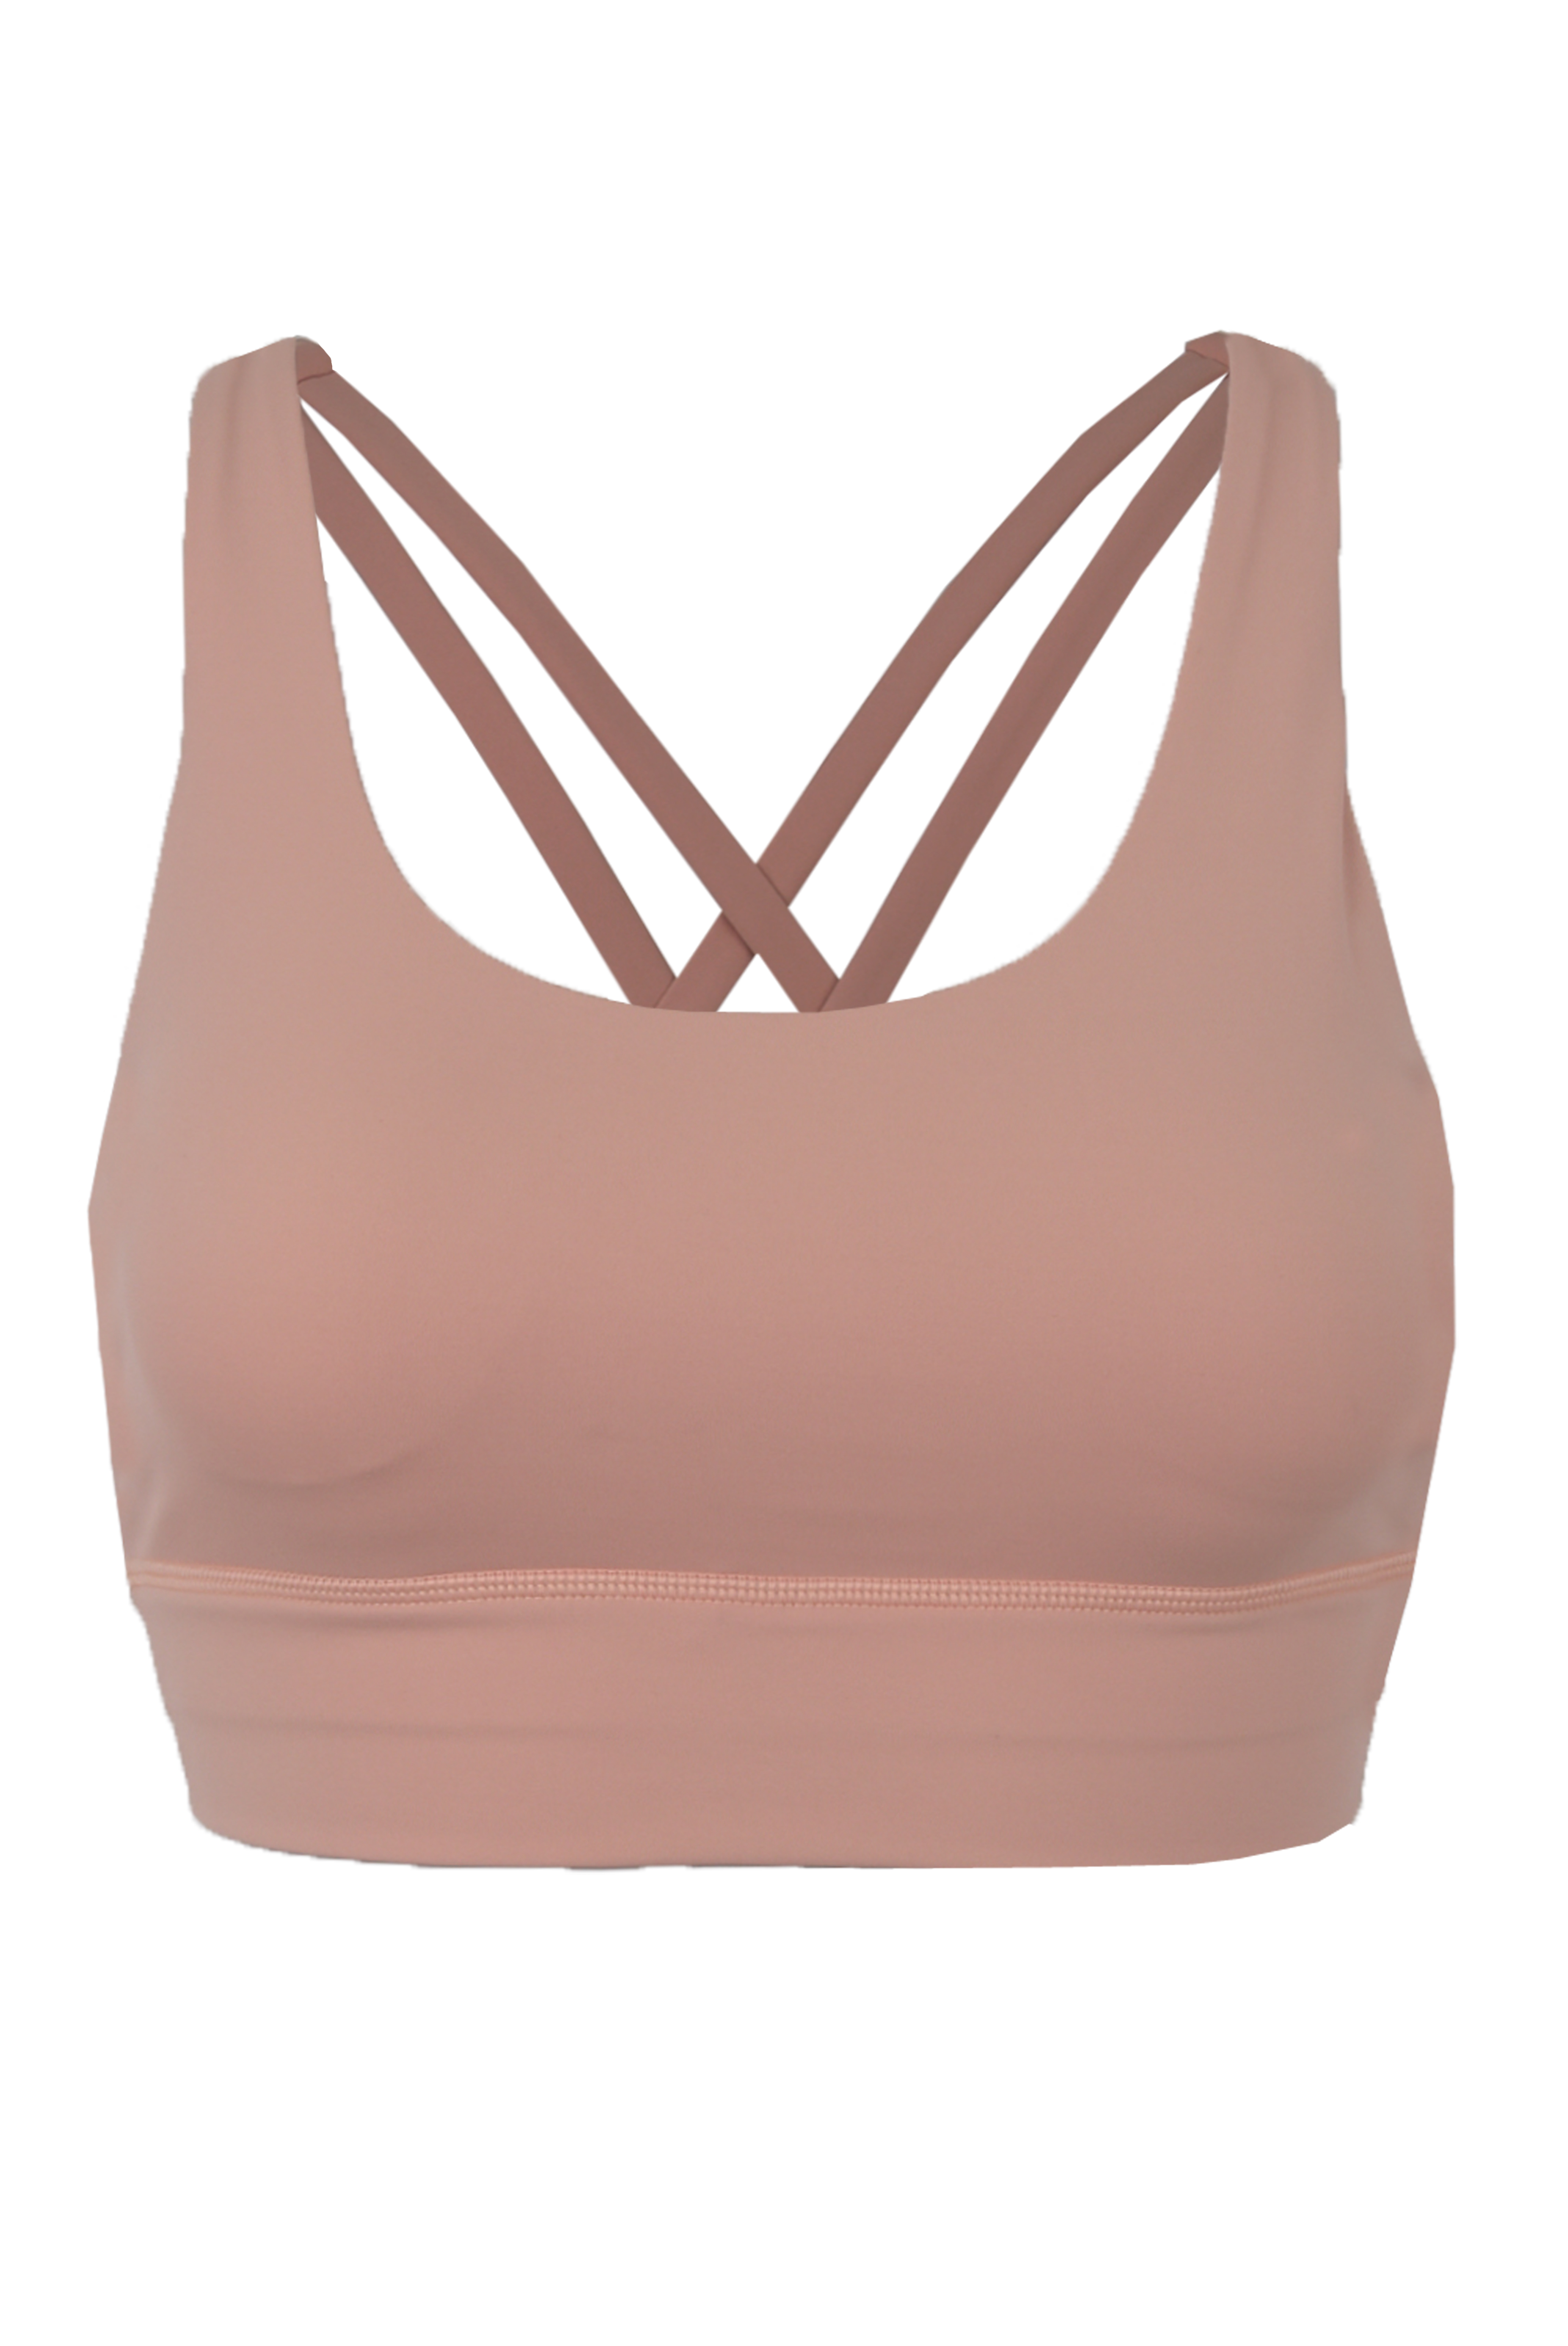 OEM Sports Bras for Women From China - Union Source